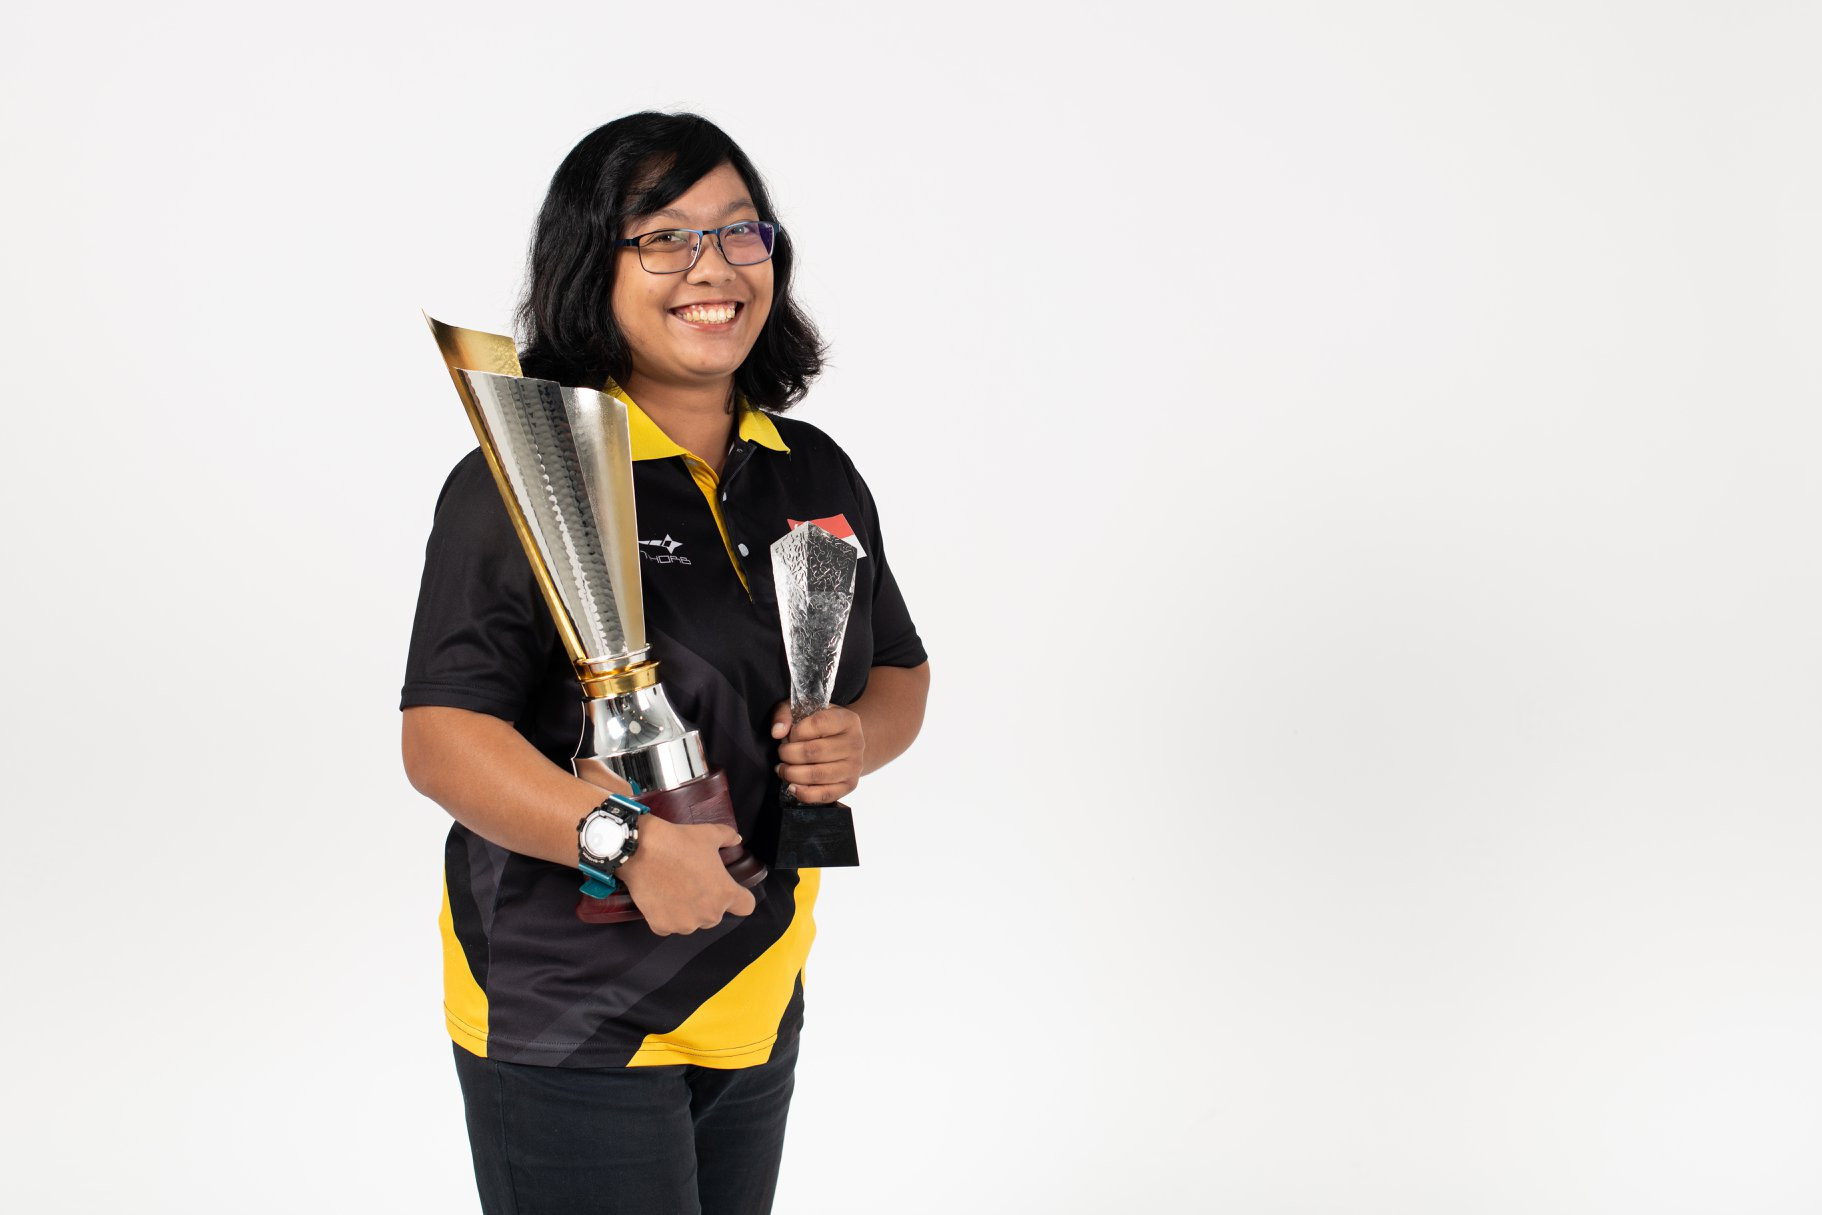 Para-archer Nur Syahidah Alim was named sportswoman of the year at the Singapore Disability Sports Awards ©SDSC